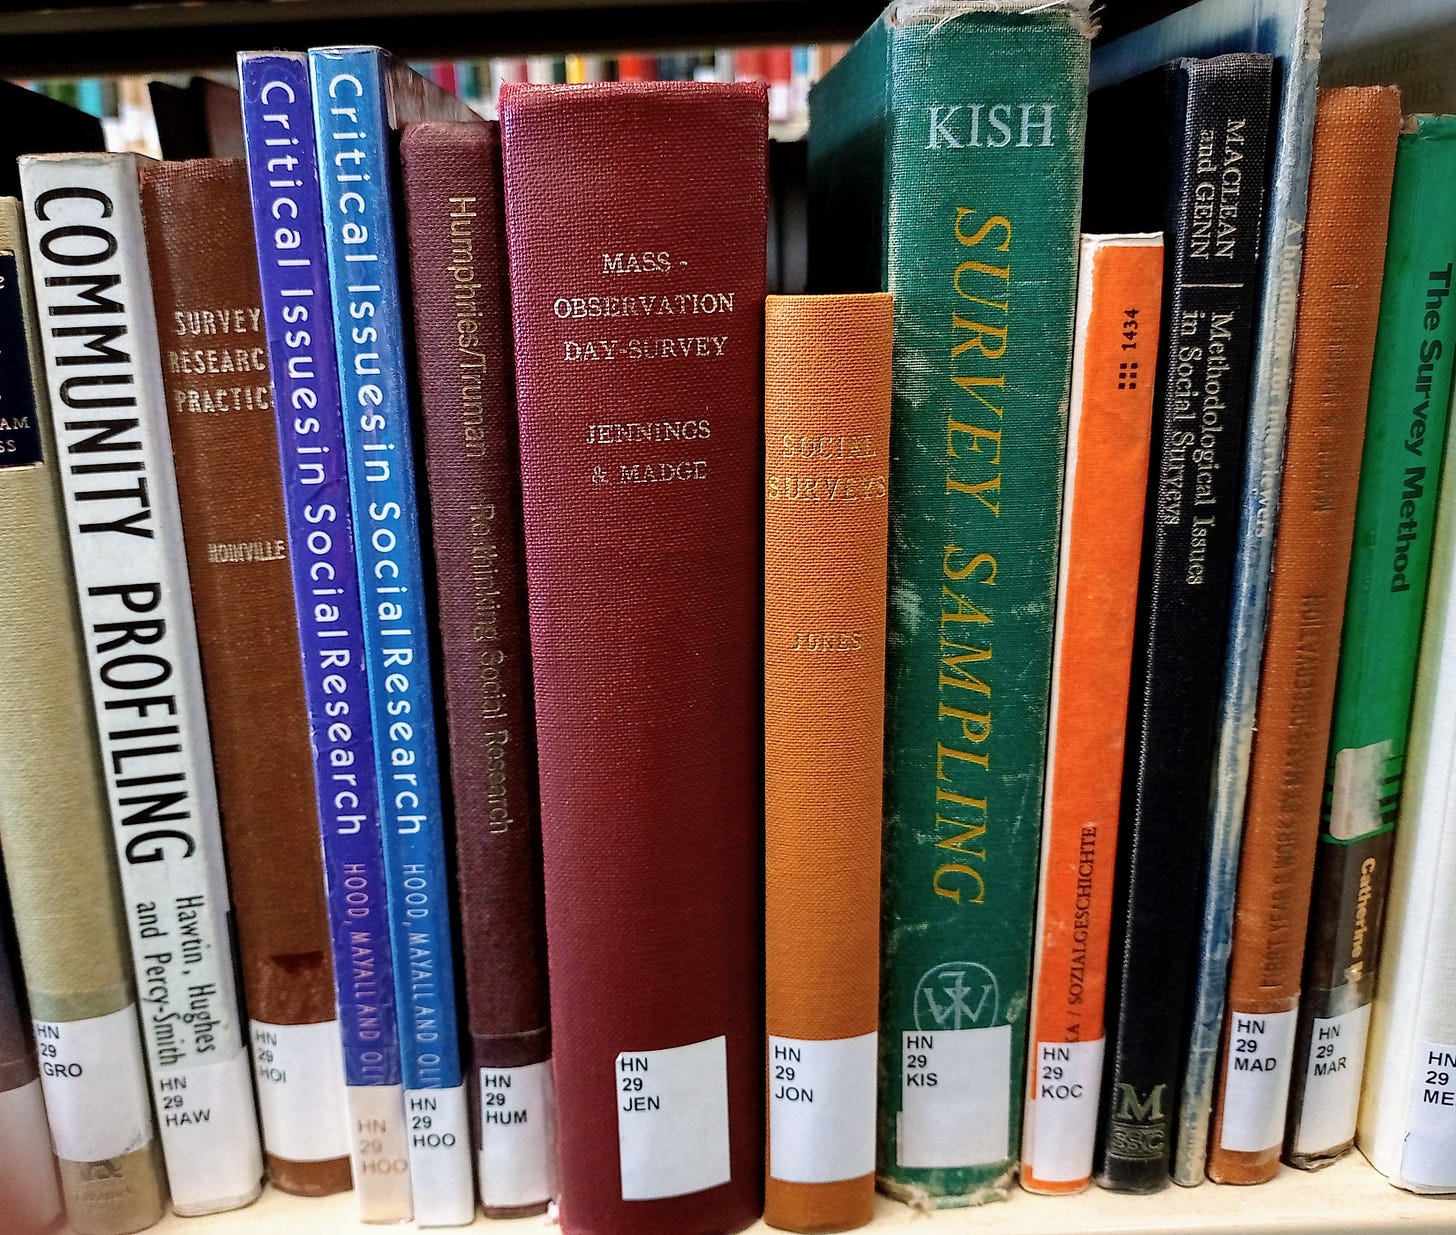 A shelf of library books about social research, in the middle of which is a book titled Mass-Observation Day-Survey